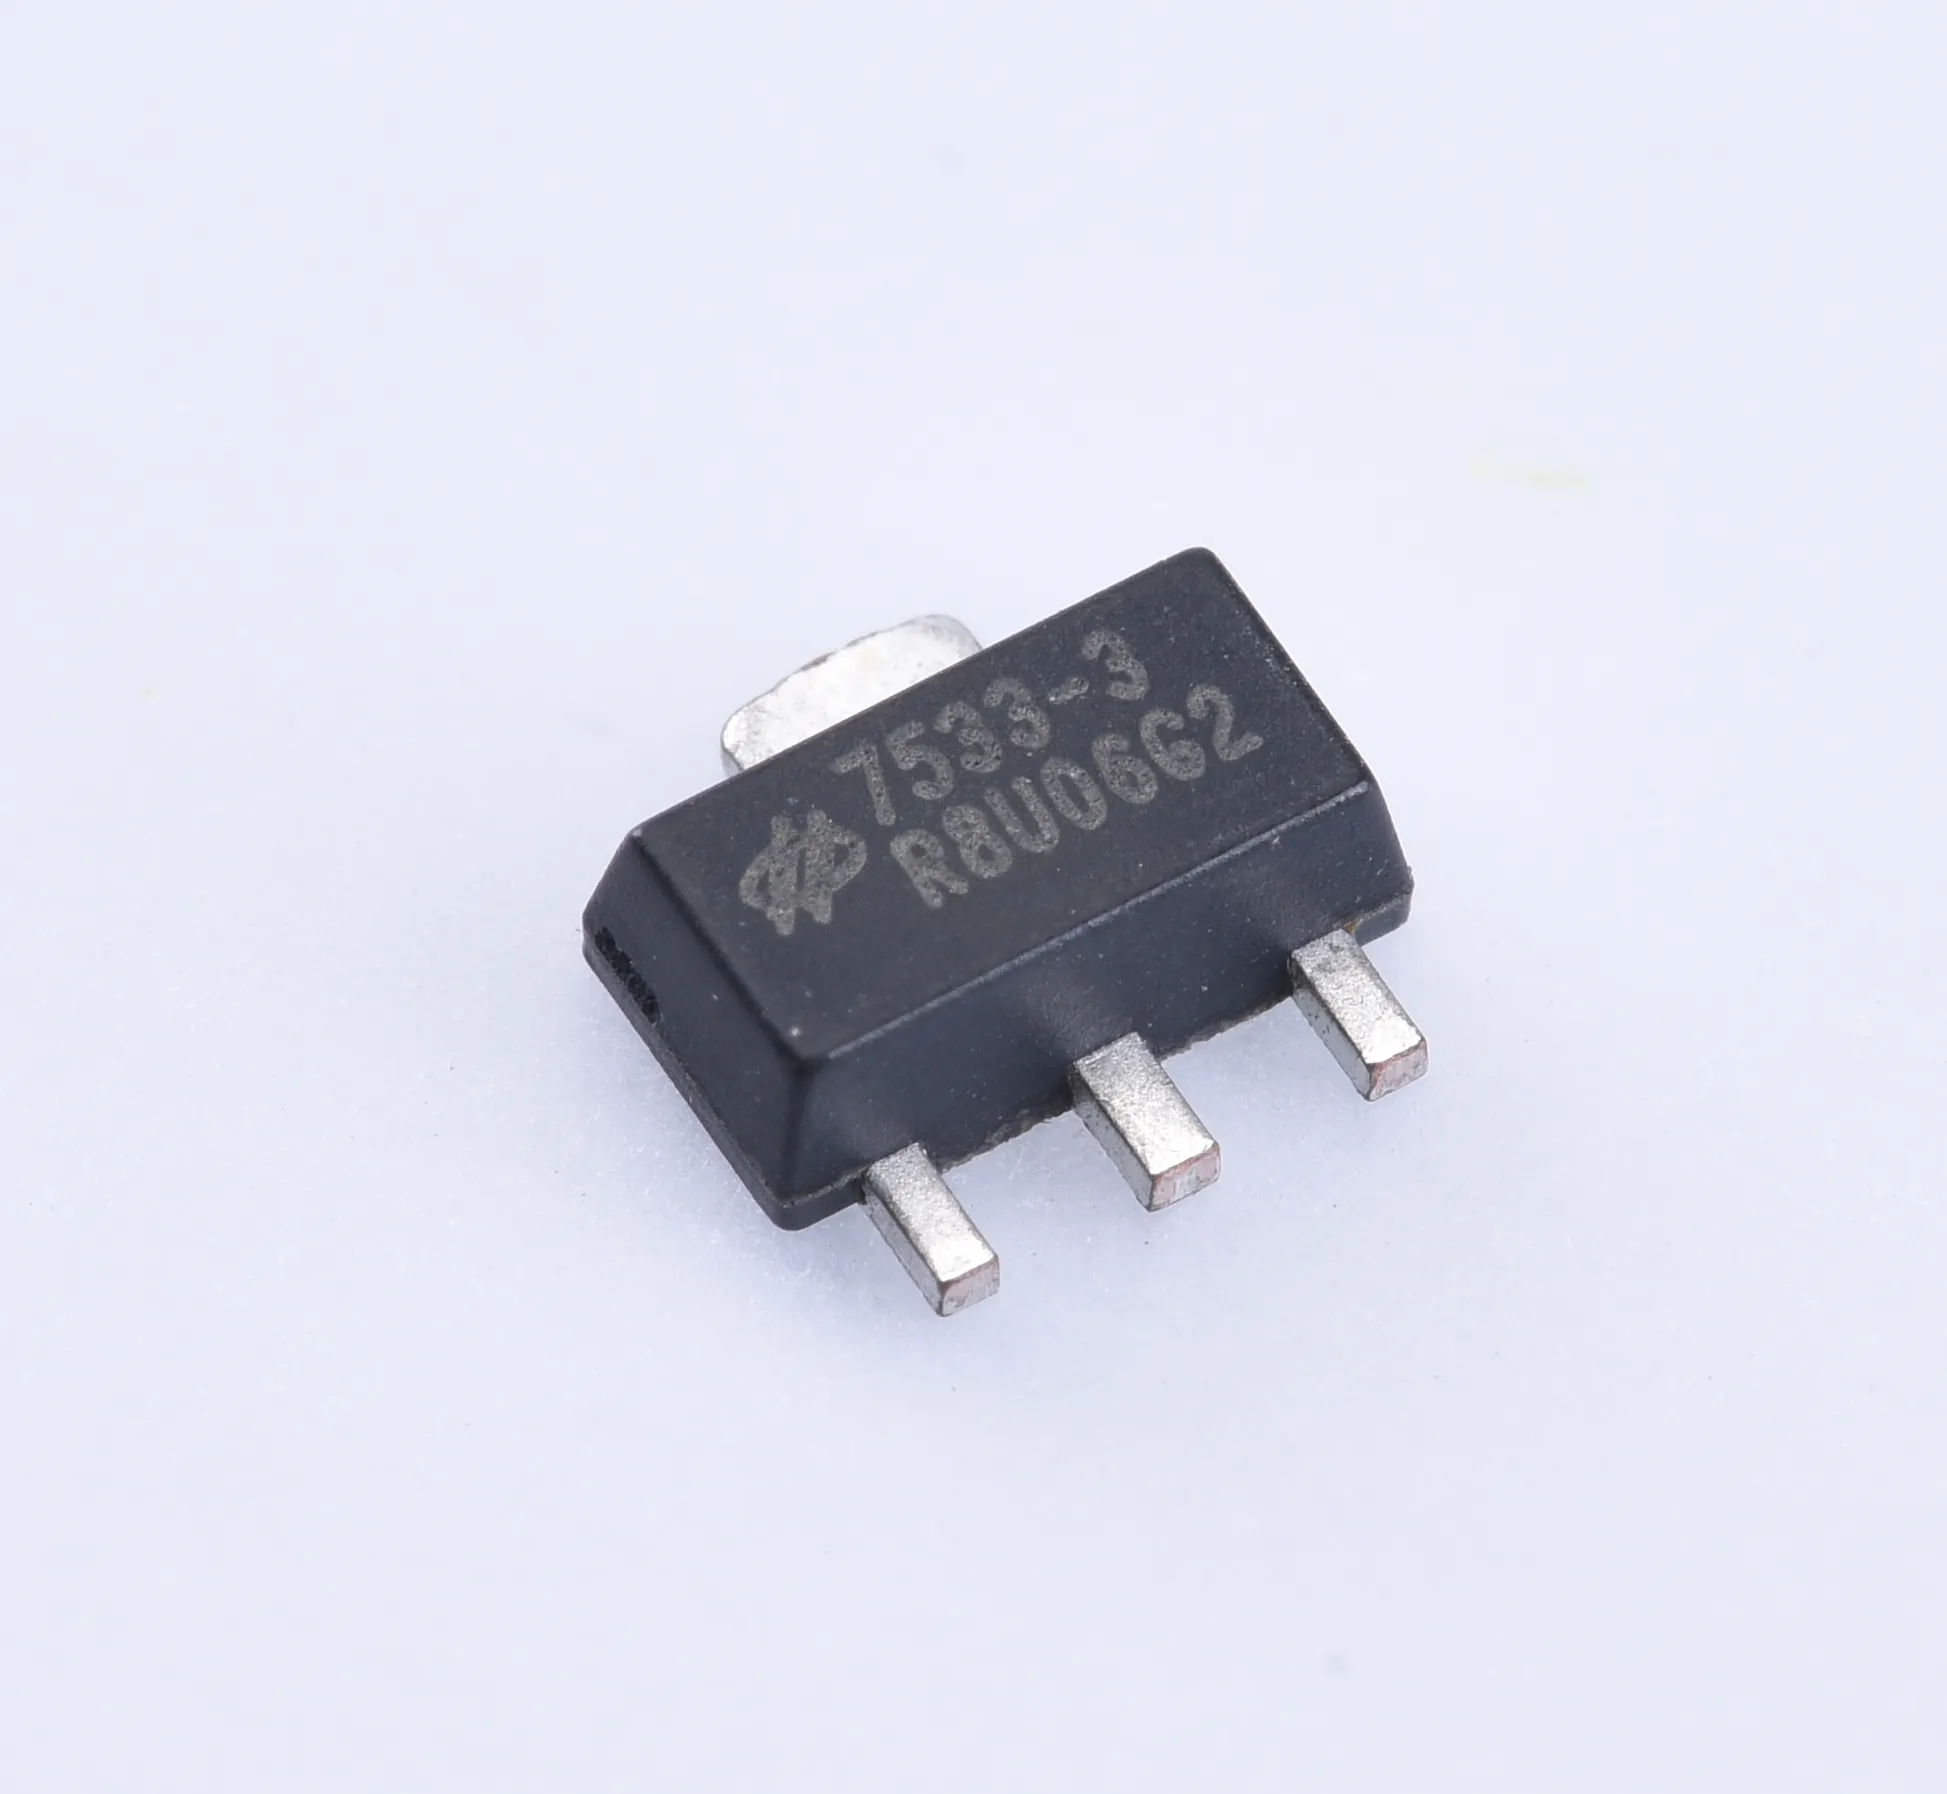 Original HT7533-3-SOT89 series is a set of three-terminal low power high voltage implemented in CMOS technology IC CHIP